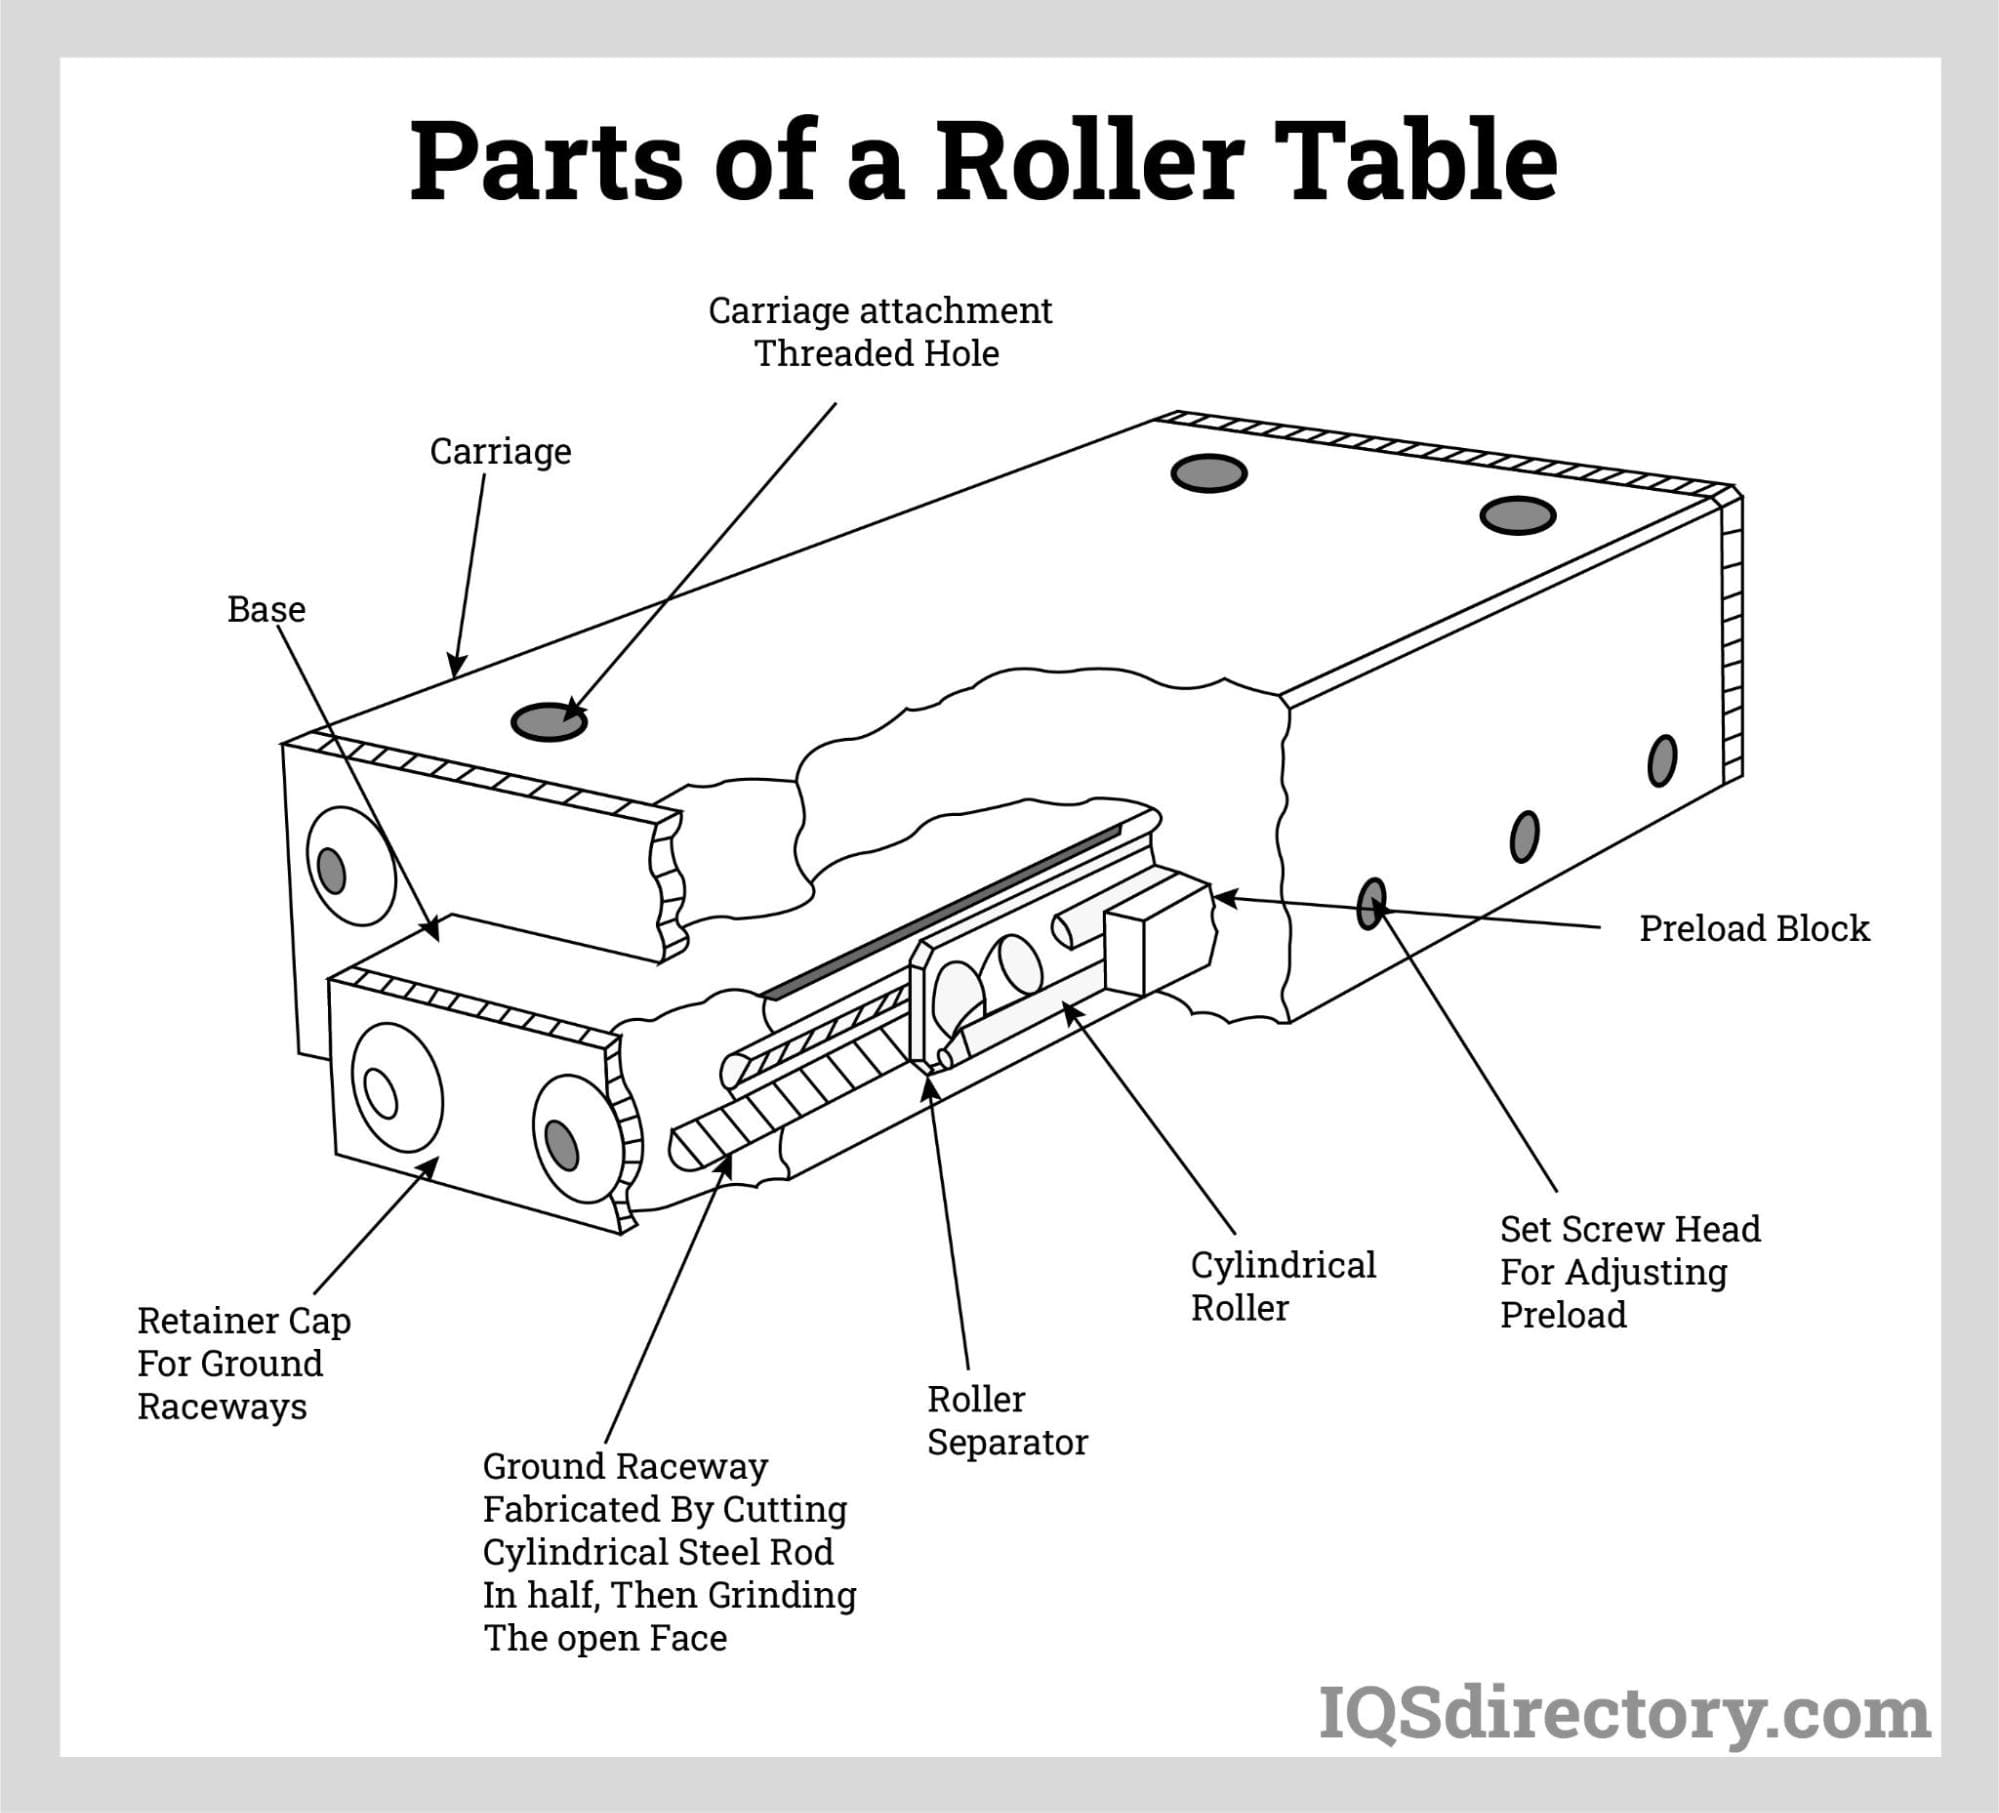 Parts of a Roller Table